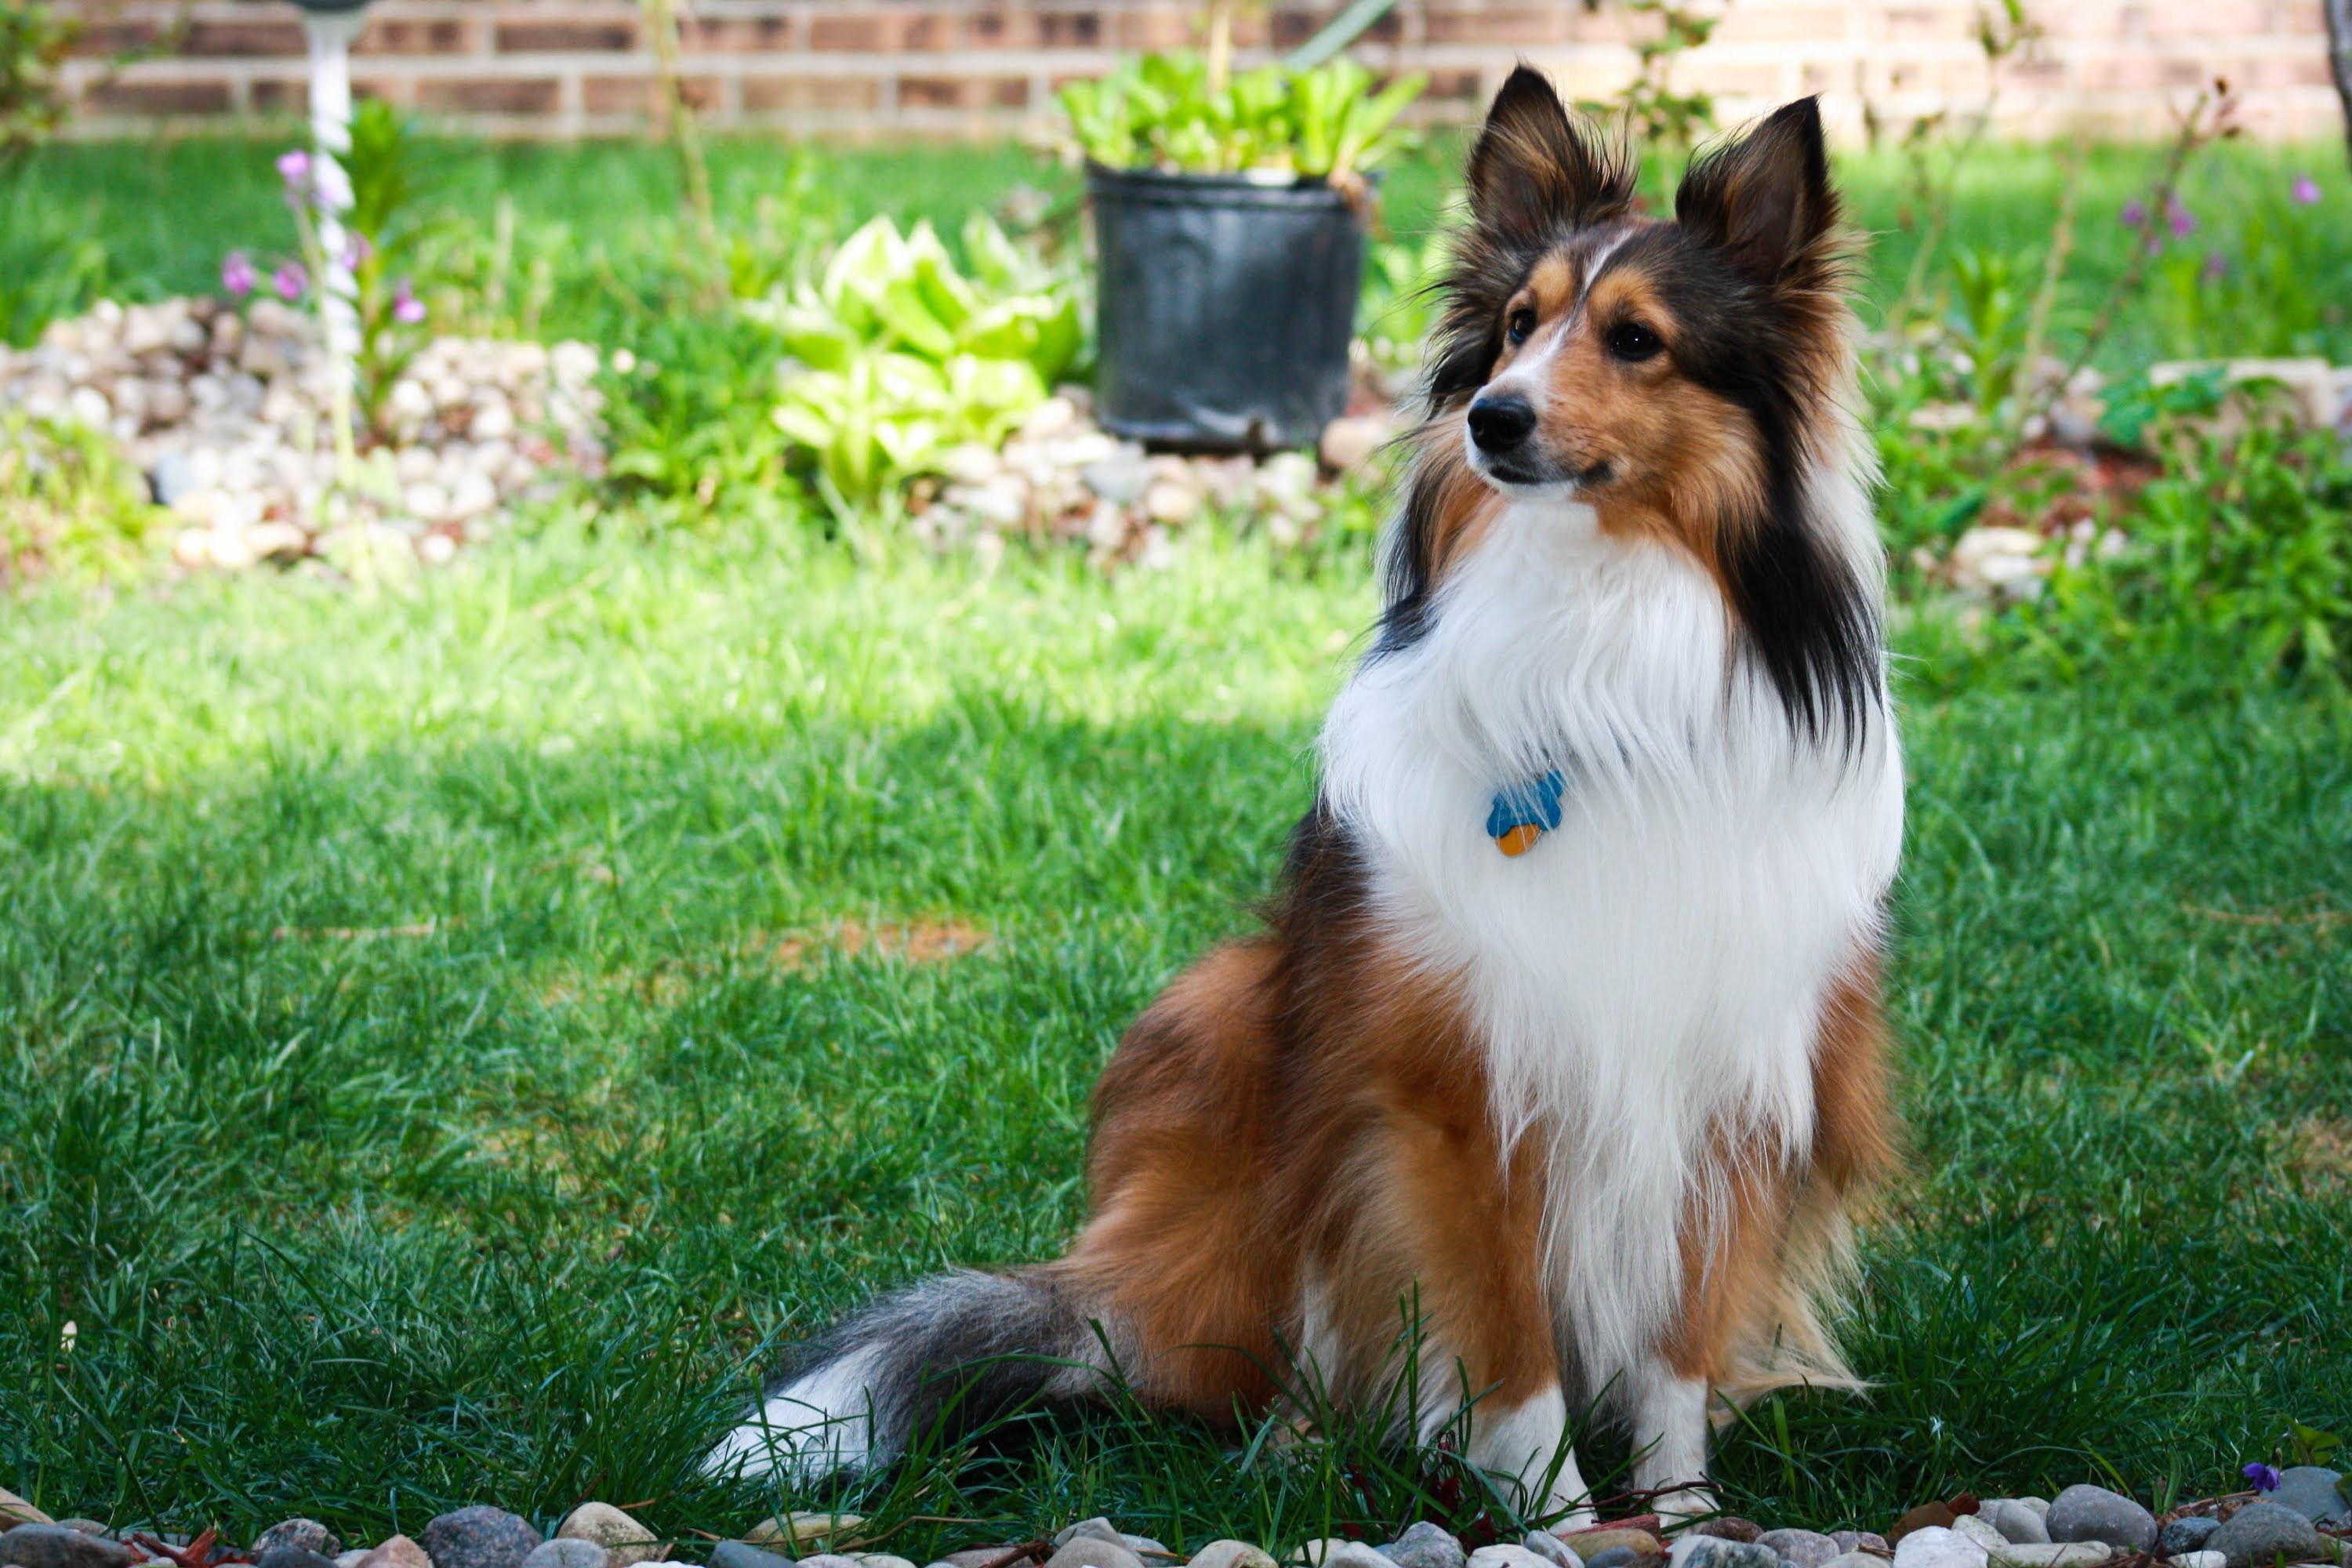 Sheltie Breed Dog Is Sitting In The Courtyard Wallpaper And Image